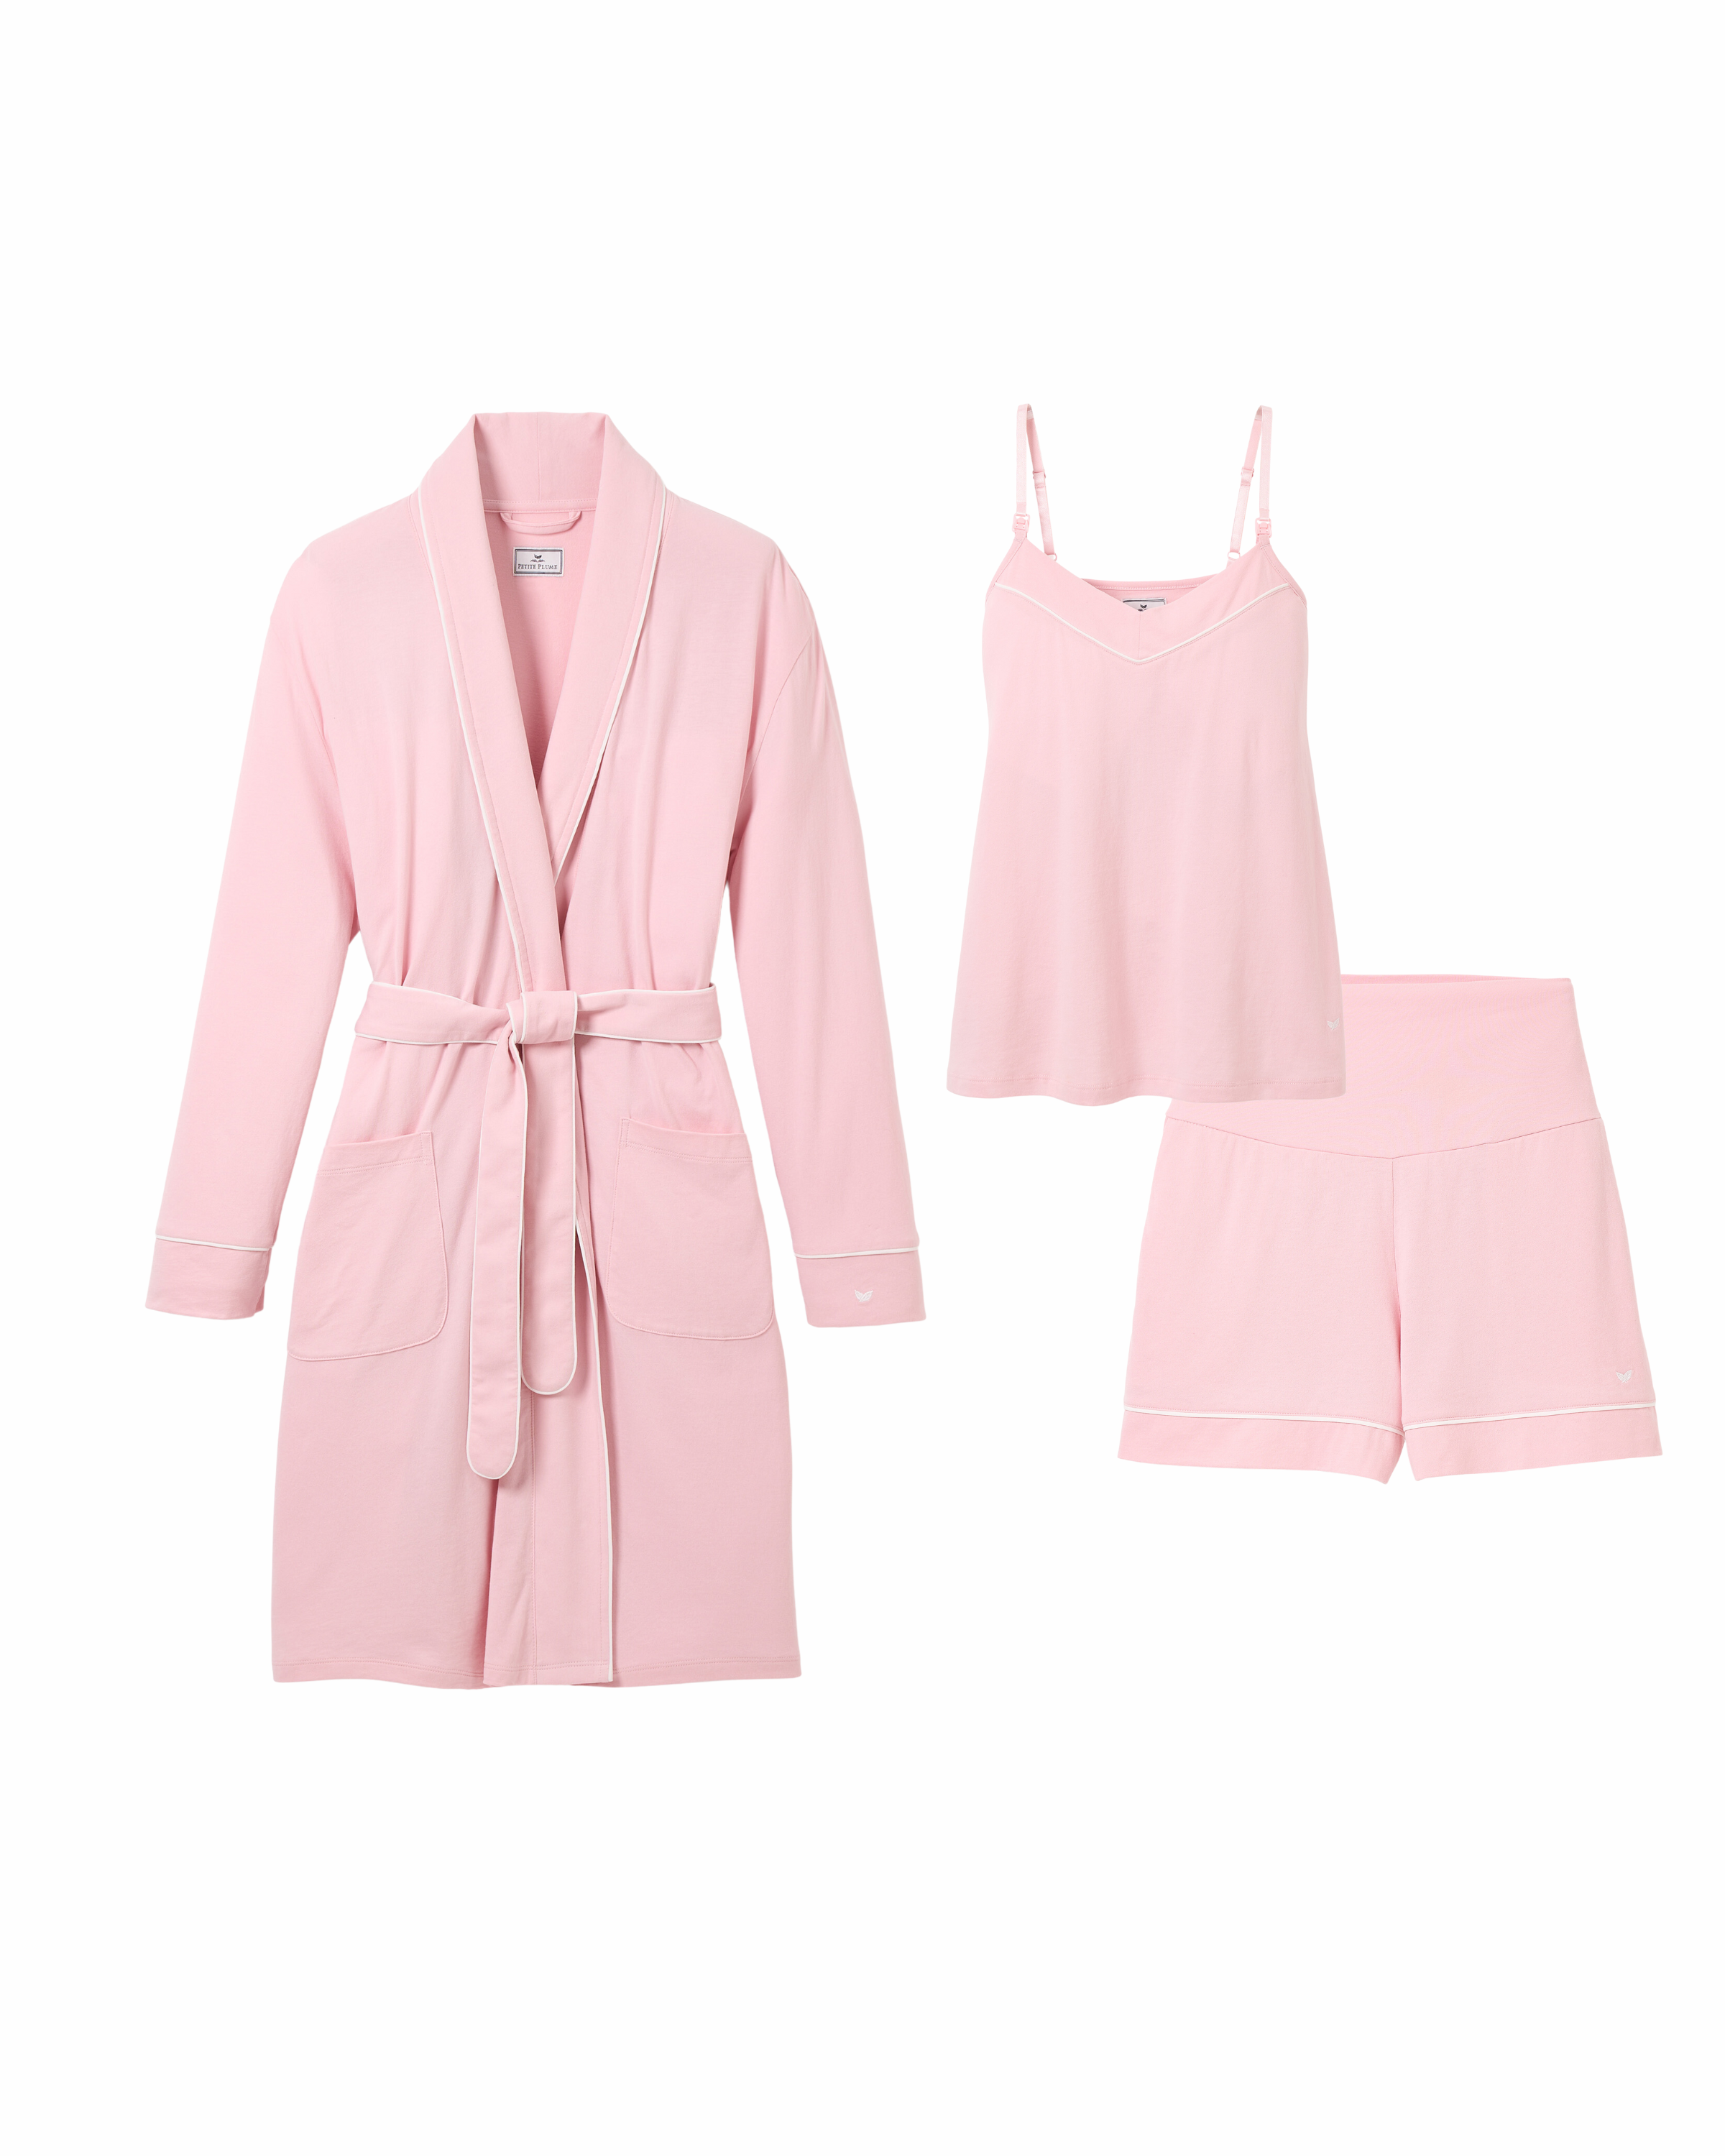 The Must Have Maternity Set in Pink